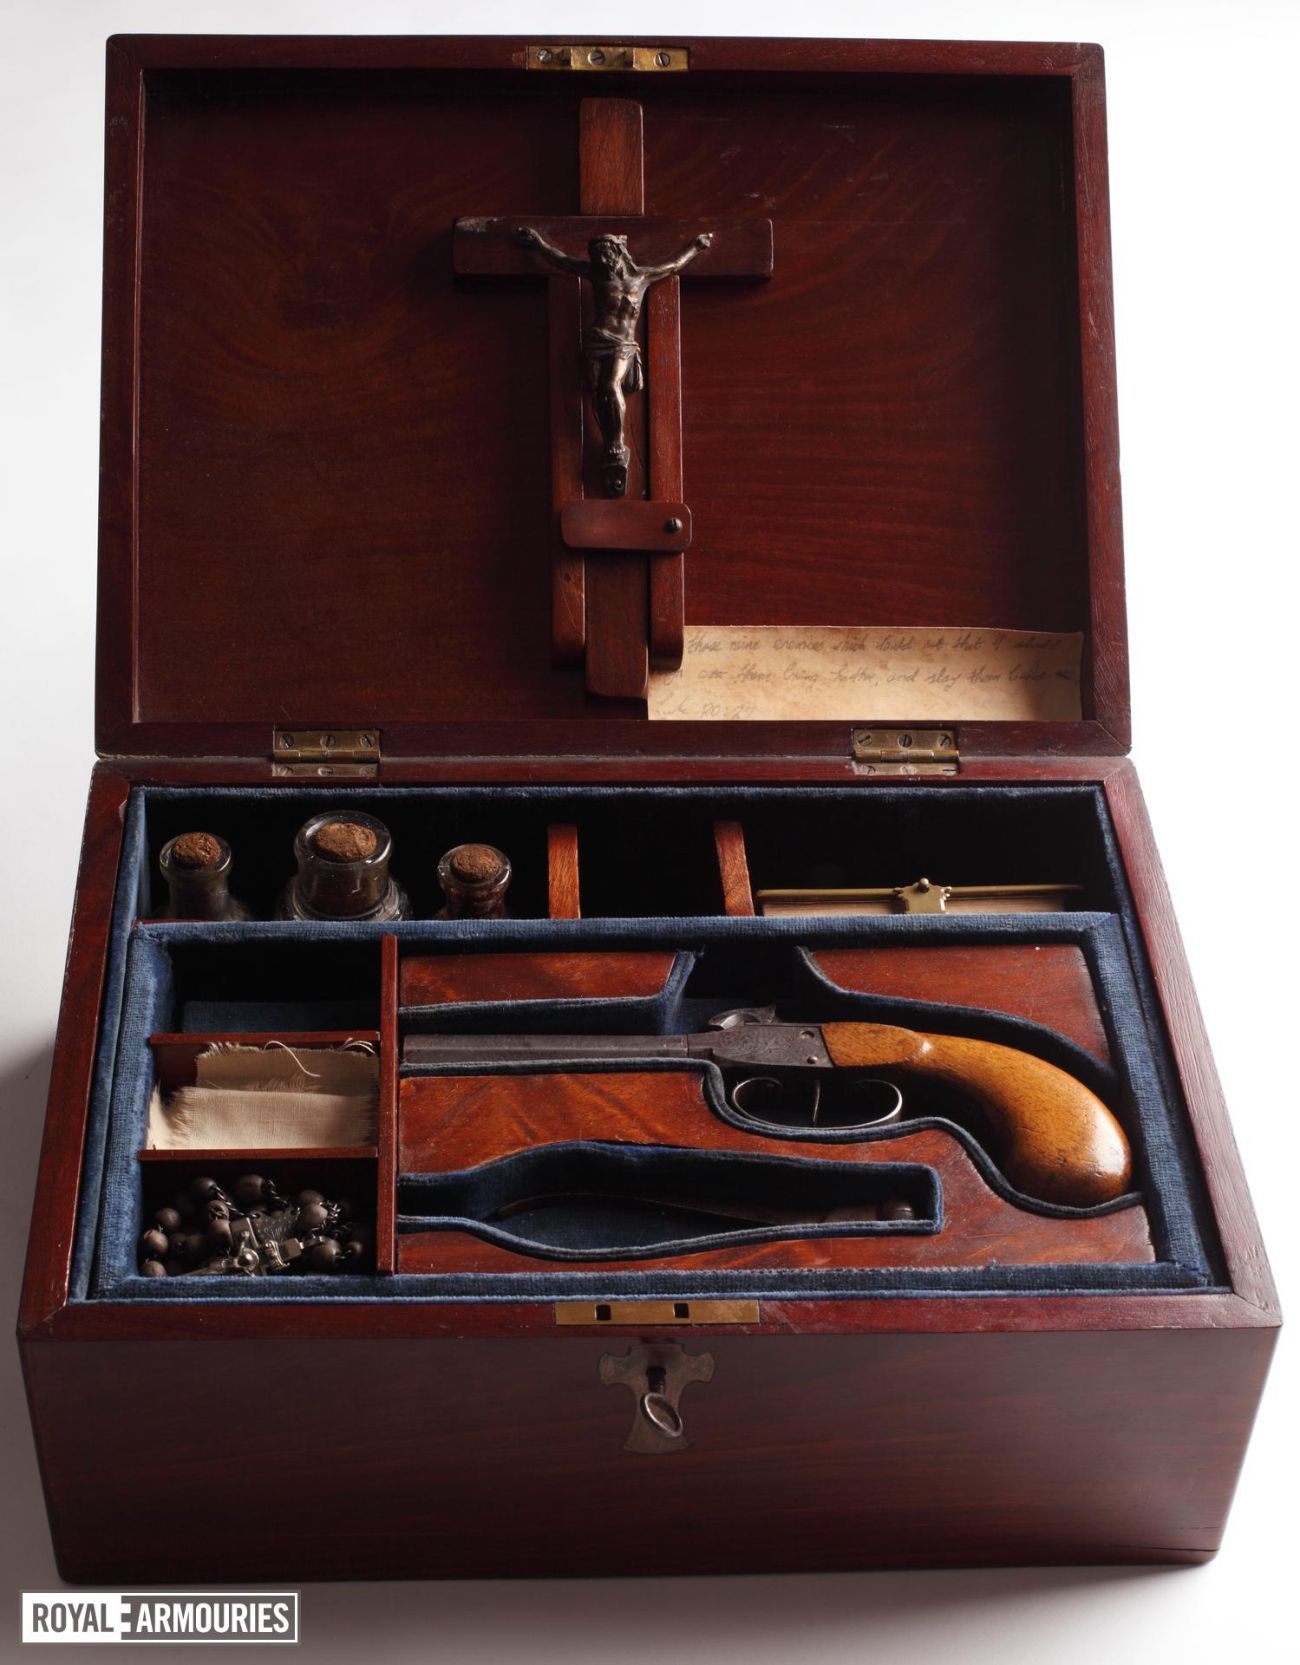 Contents of vampire killing kit photographed in box